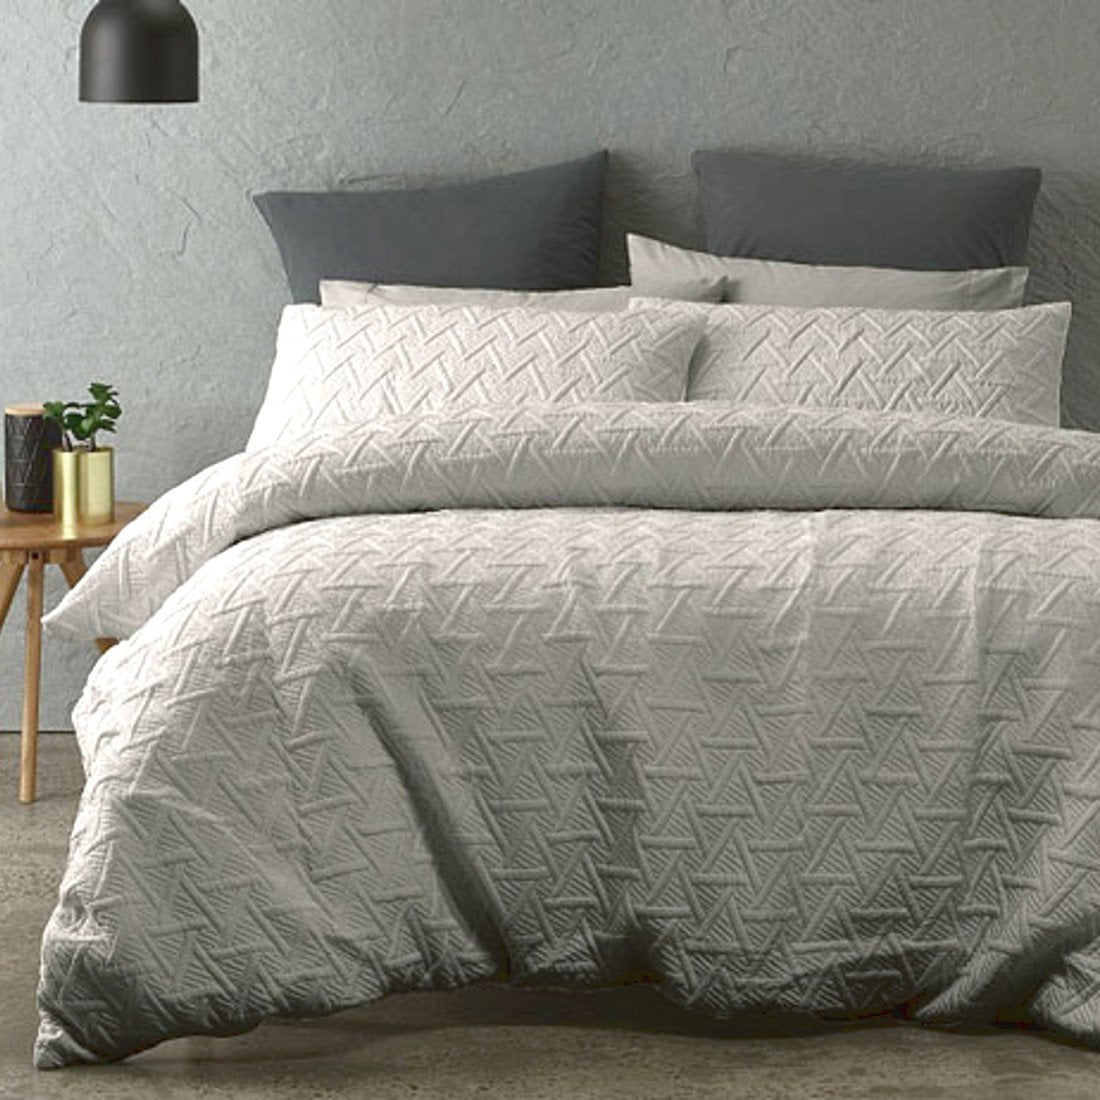 Silver Grey duvet cover set is Sophisticated, Minimal and understated addition with the quilted effect fabric.